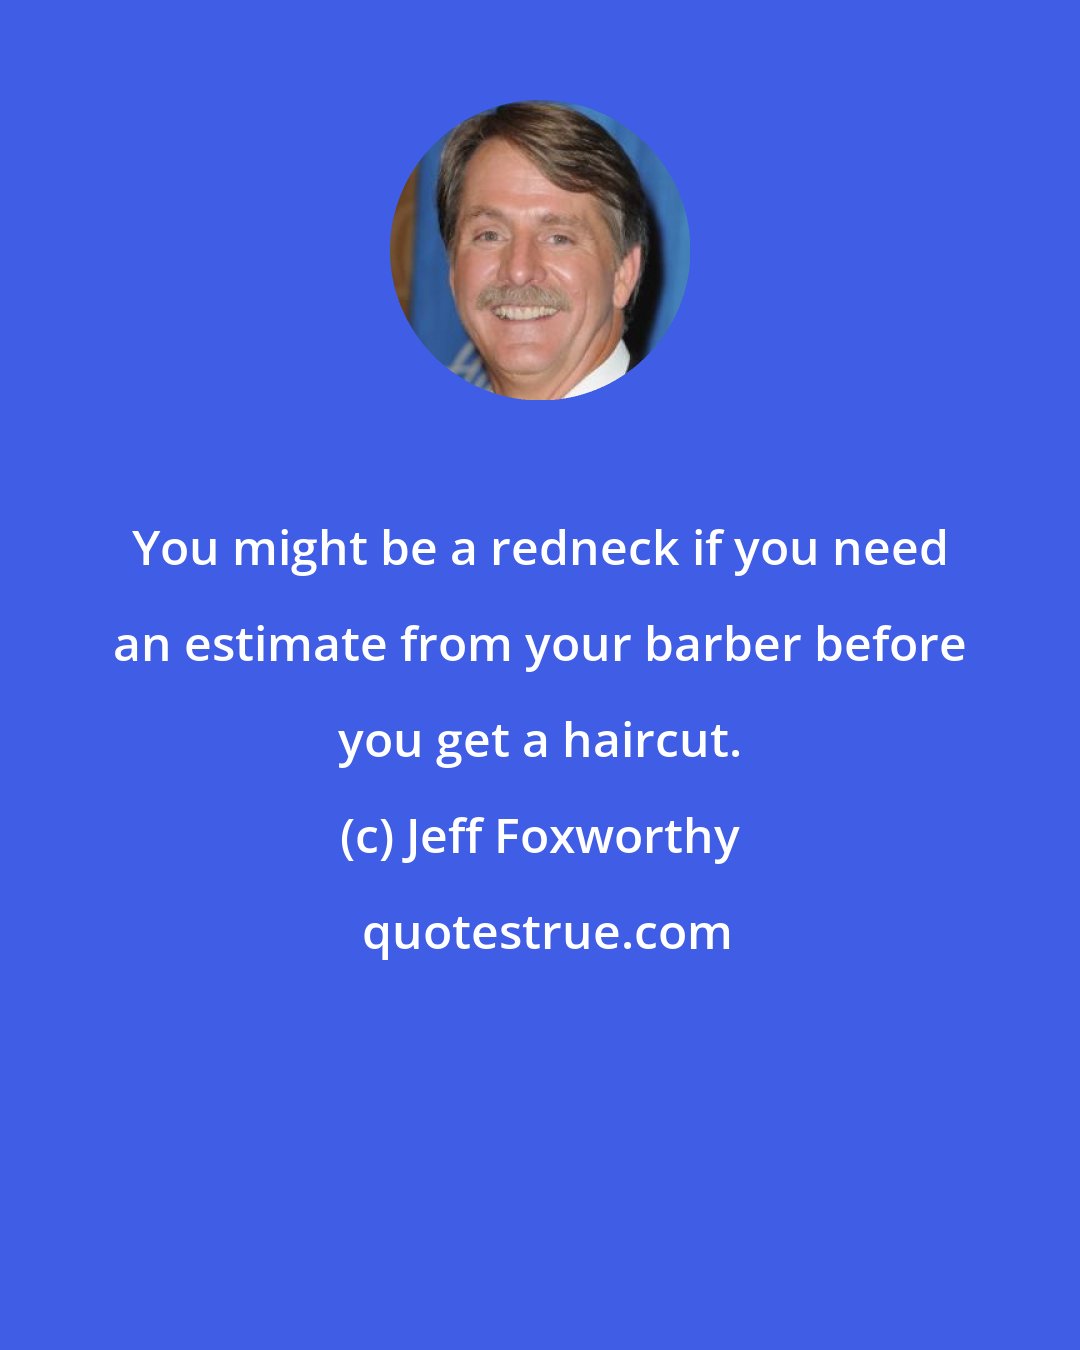 Jeff Foxworthy: You might be a redneck if you need an estimate from your barber before you get a haircut.